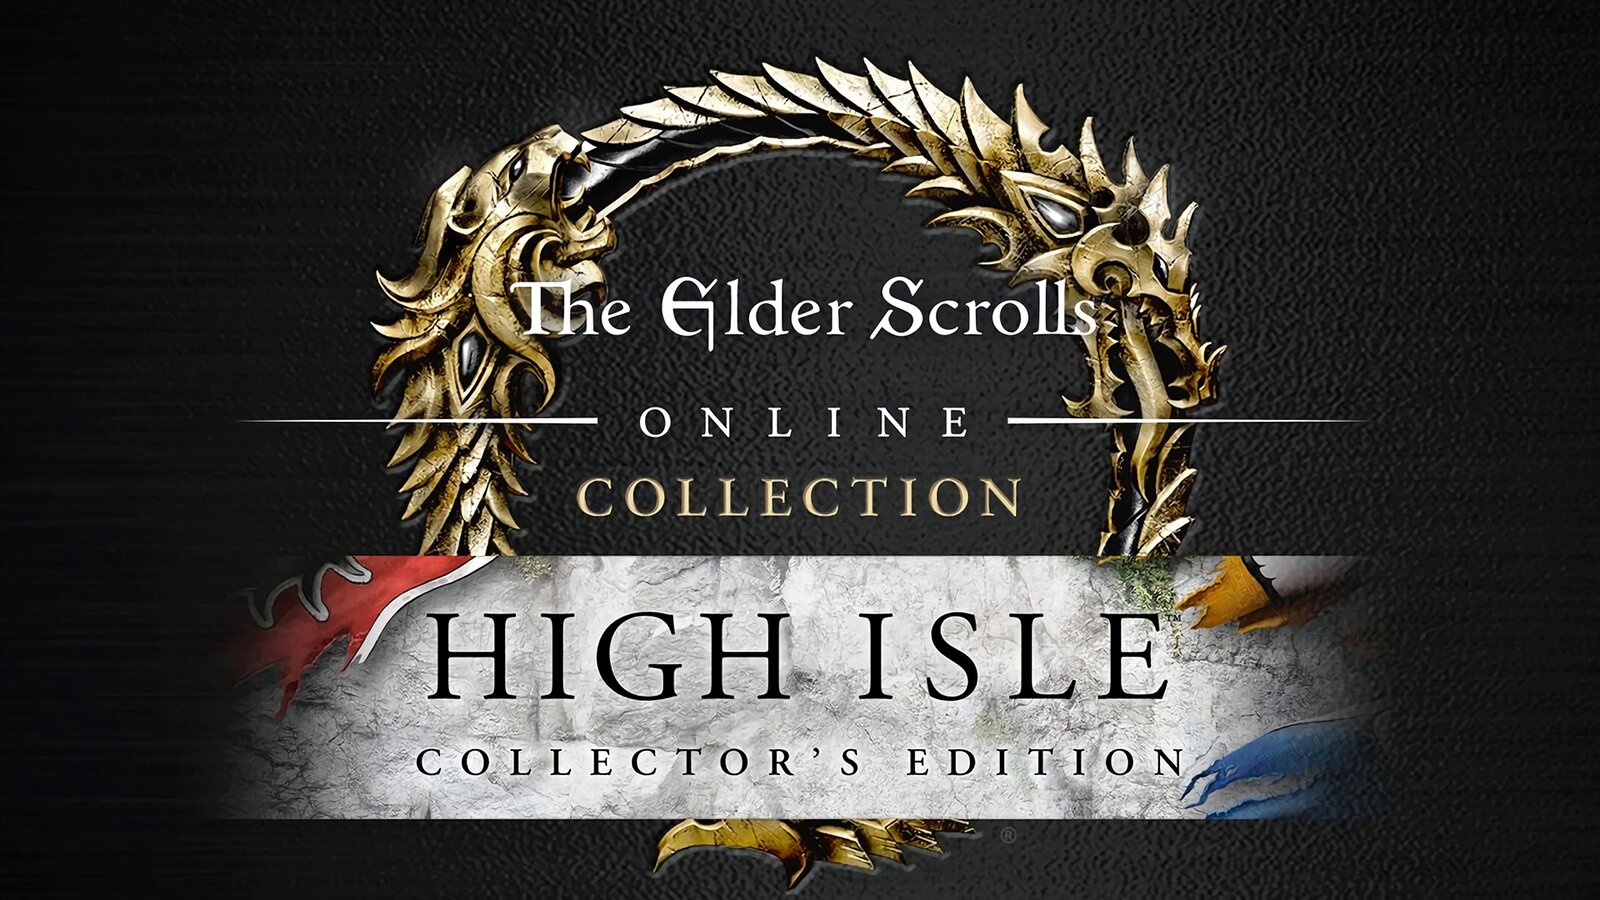 The Elder Scrolls Online Collection: High Isle - Collector's Edition